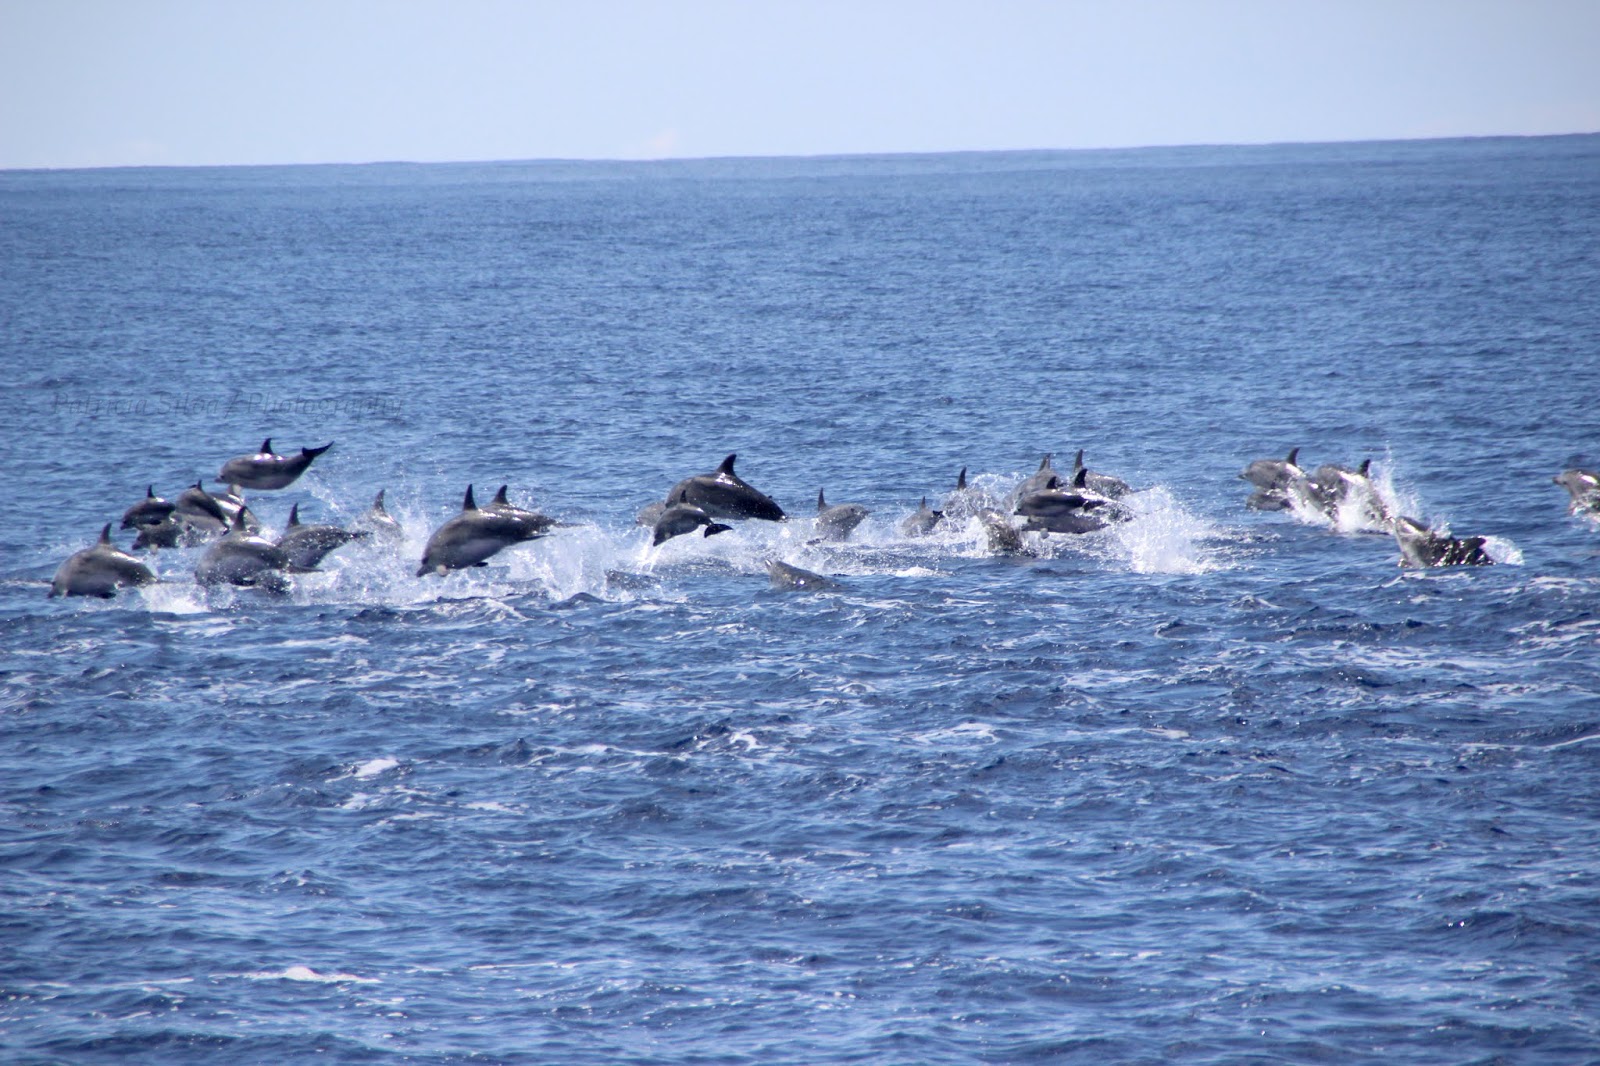 a group of Azores dolphins jumping arround